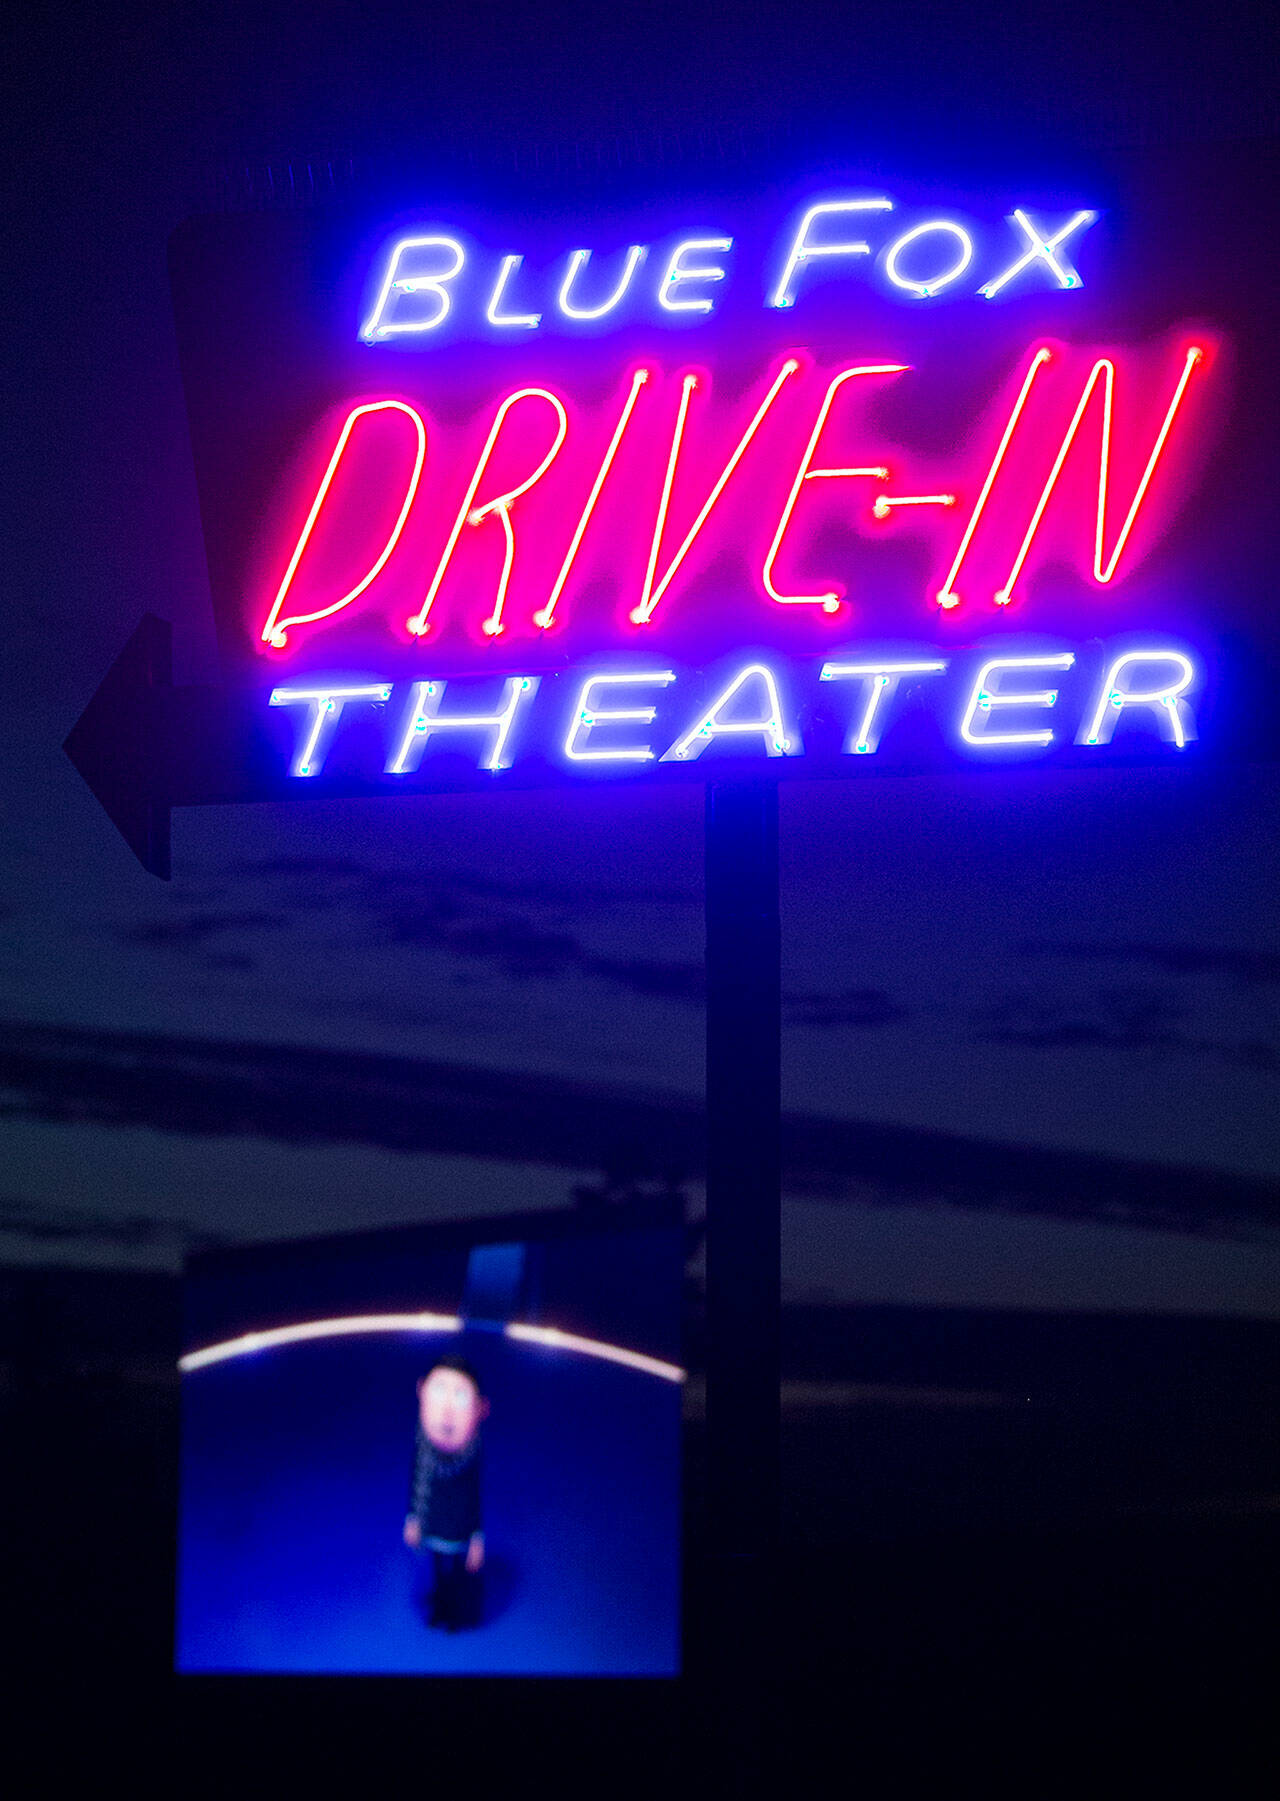 “Minions: The Rise of Gru” plays on the projector screen as the Blue Fox Drive-In Theater sign glows in the nighttime at the Oak Harbor outdoor movie theater. (Ryan Berry / The Herald)